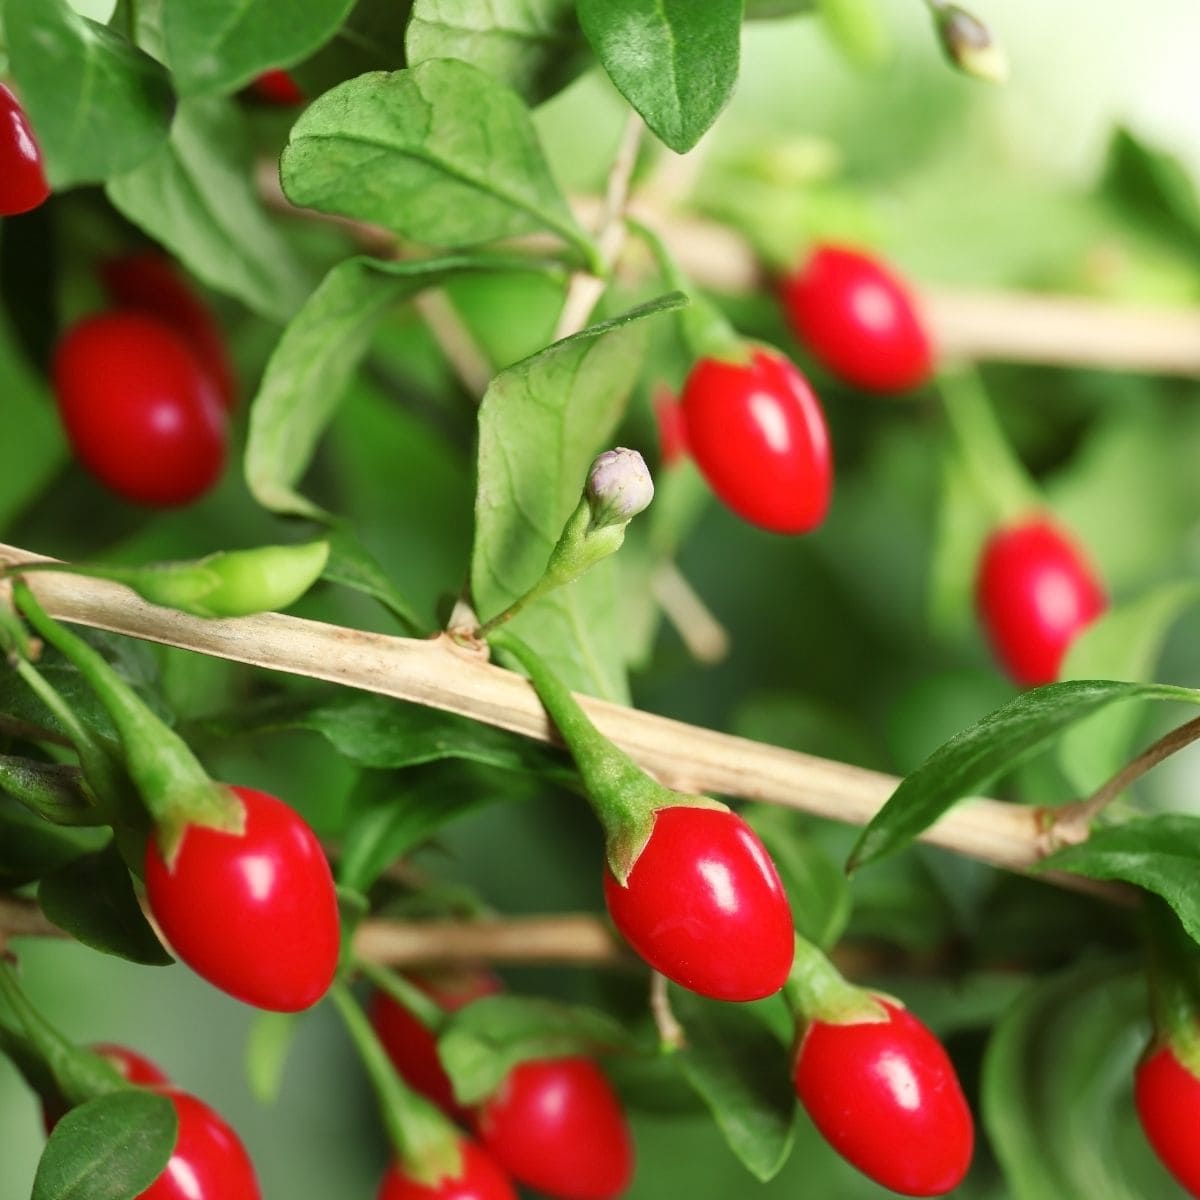 Ripe goji berries growing on a bush with green leaves.